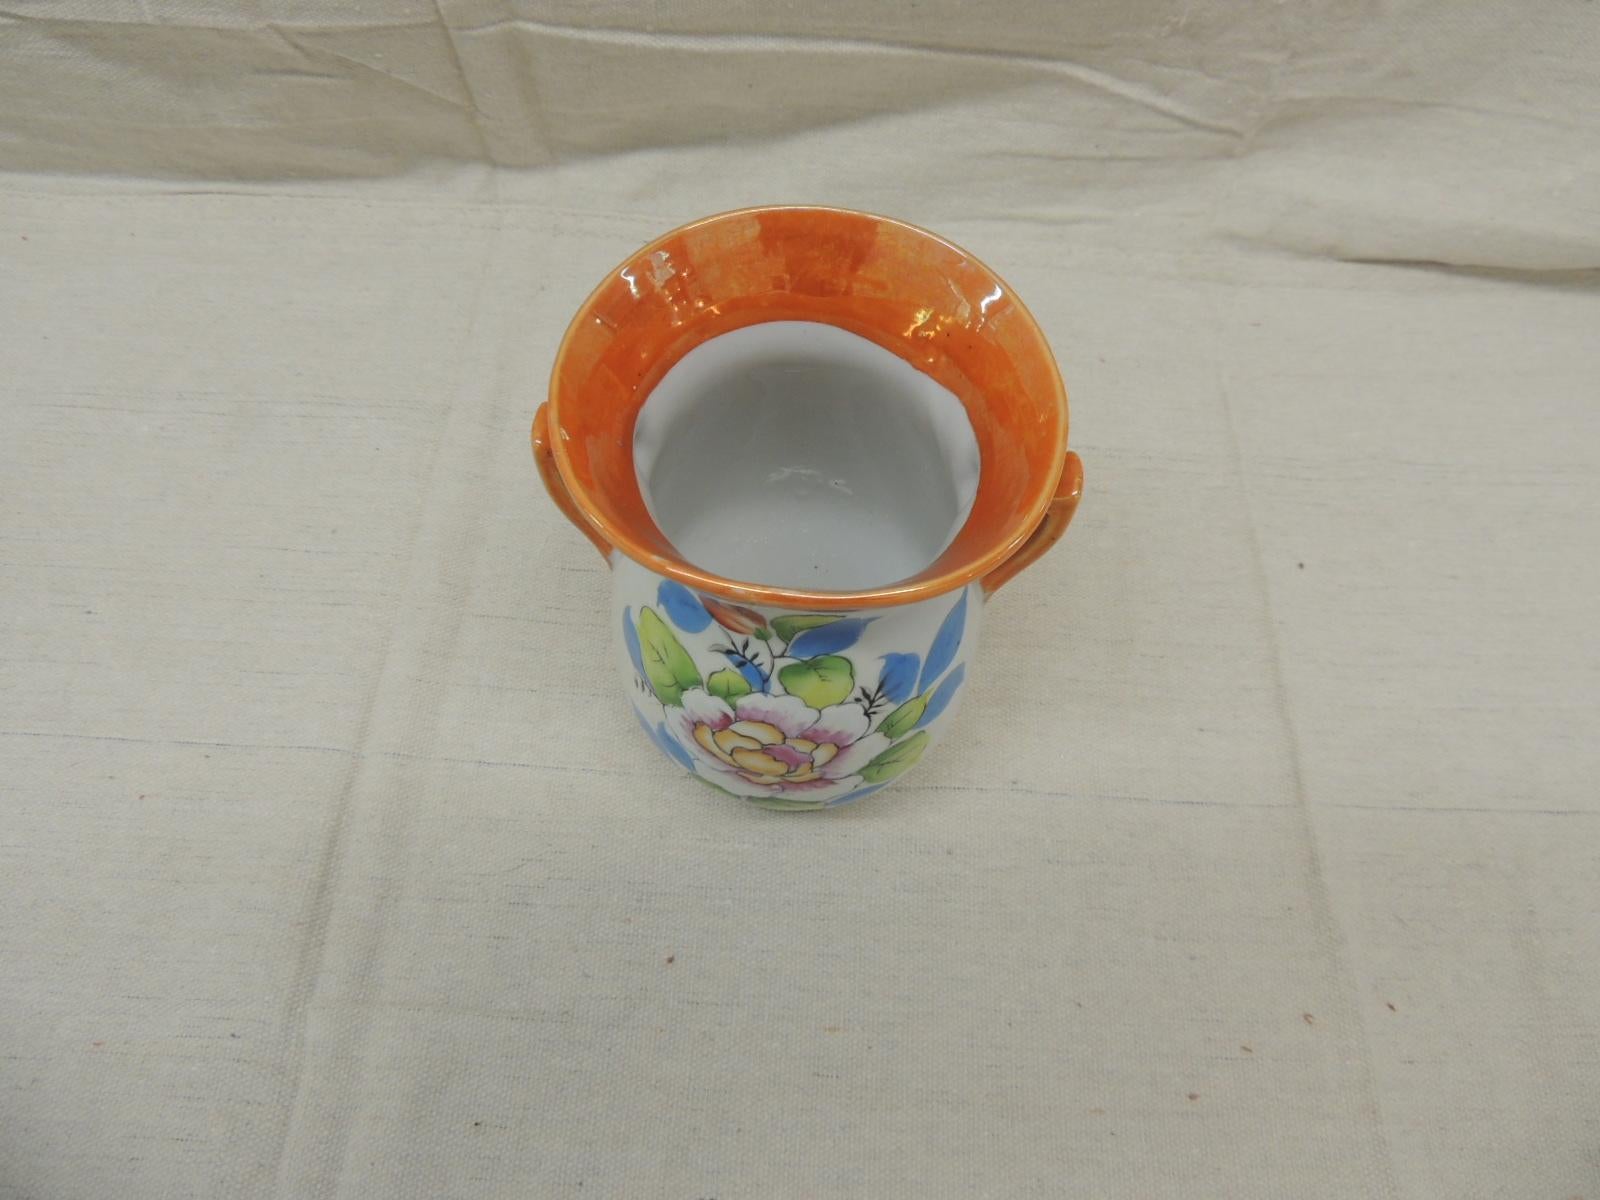 Vintage Japanese Lusterware orange and blue small vase with handles.
Size: 4.5